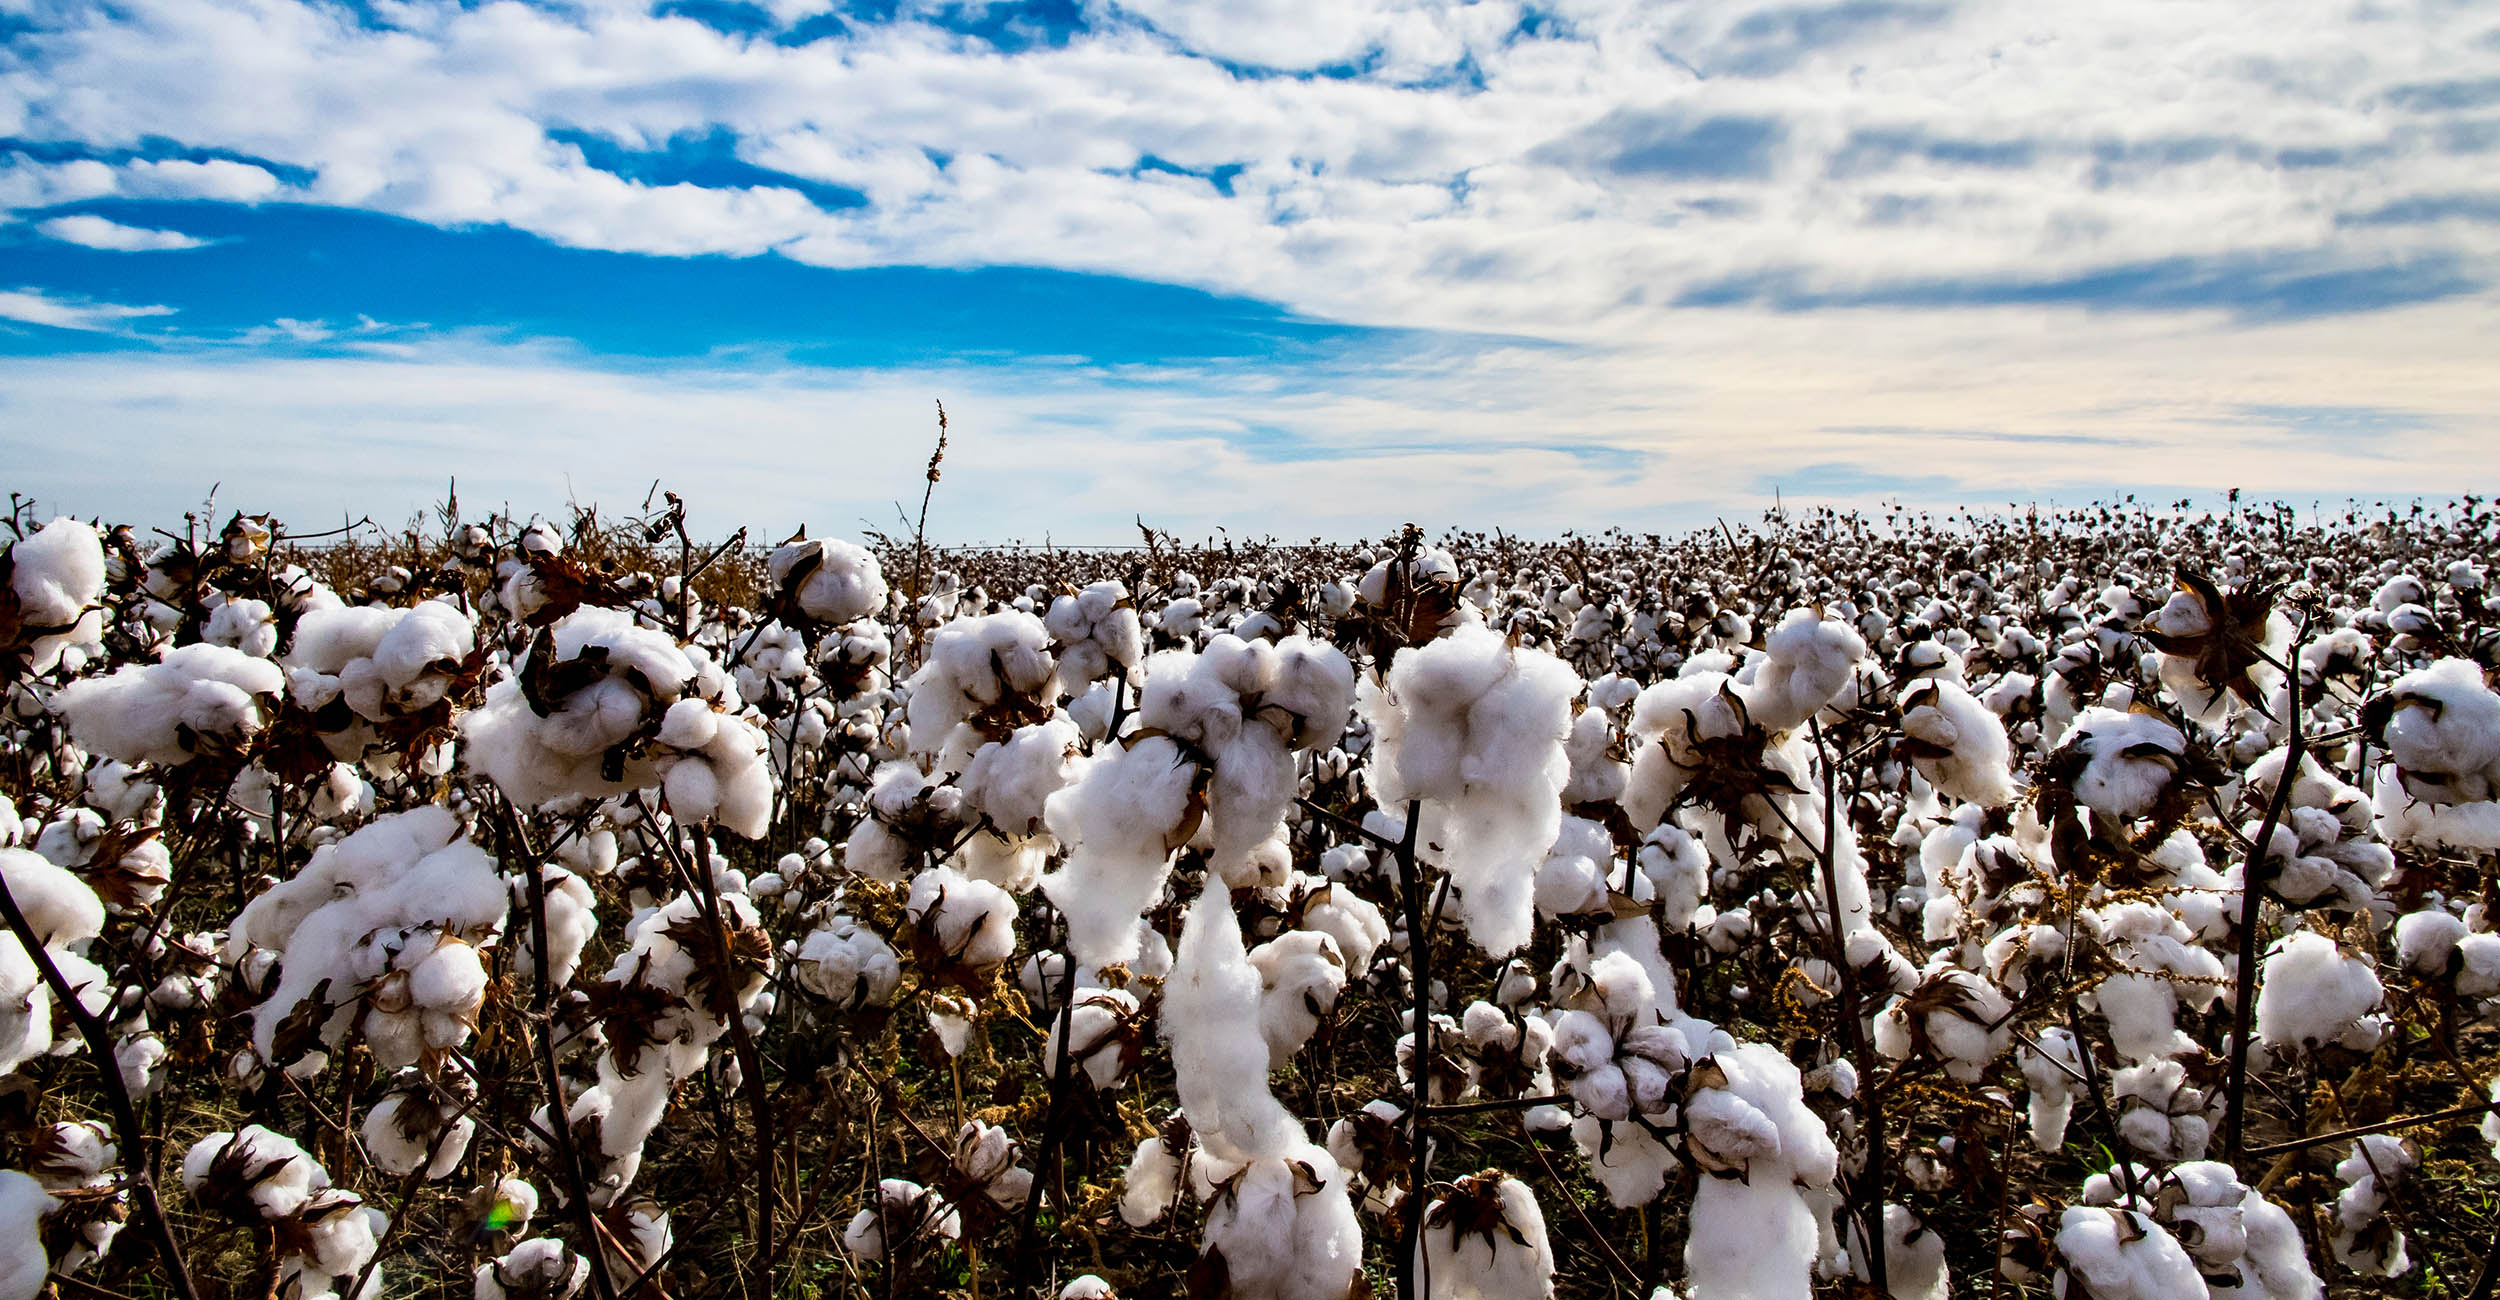 Image of a cotton field.